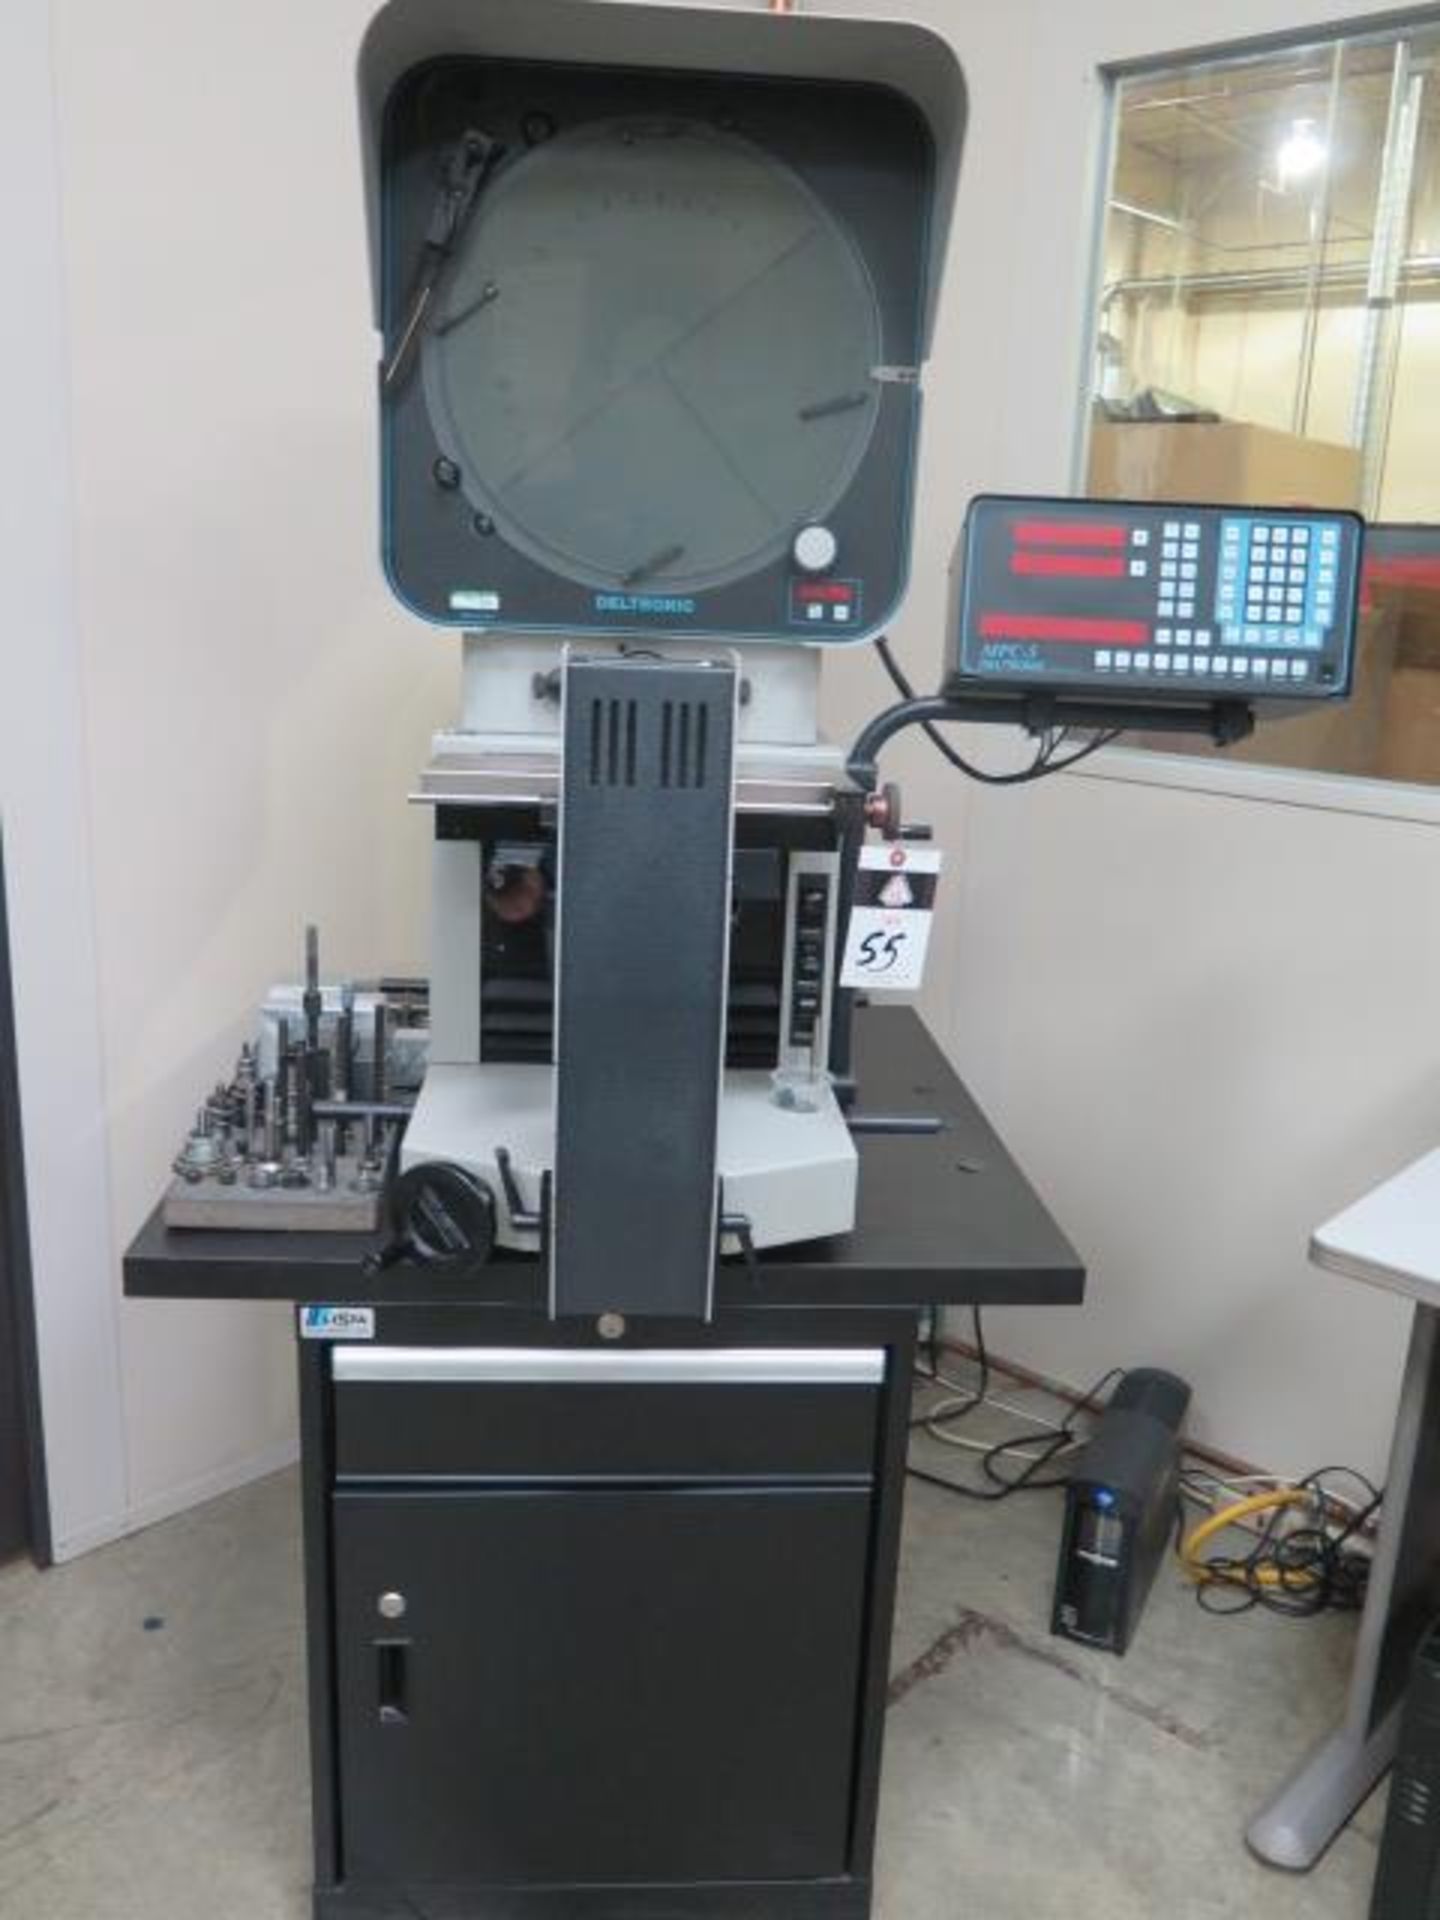 Deltronic DH216-MPC5 15” Optical Comparator s/n 389045807 w/ MPC-5 Programmable DRO, SOLD AS IS